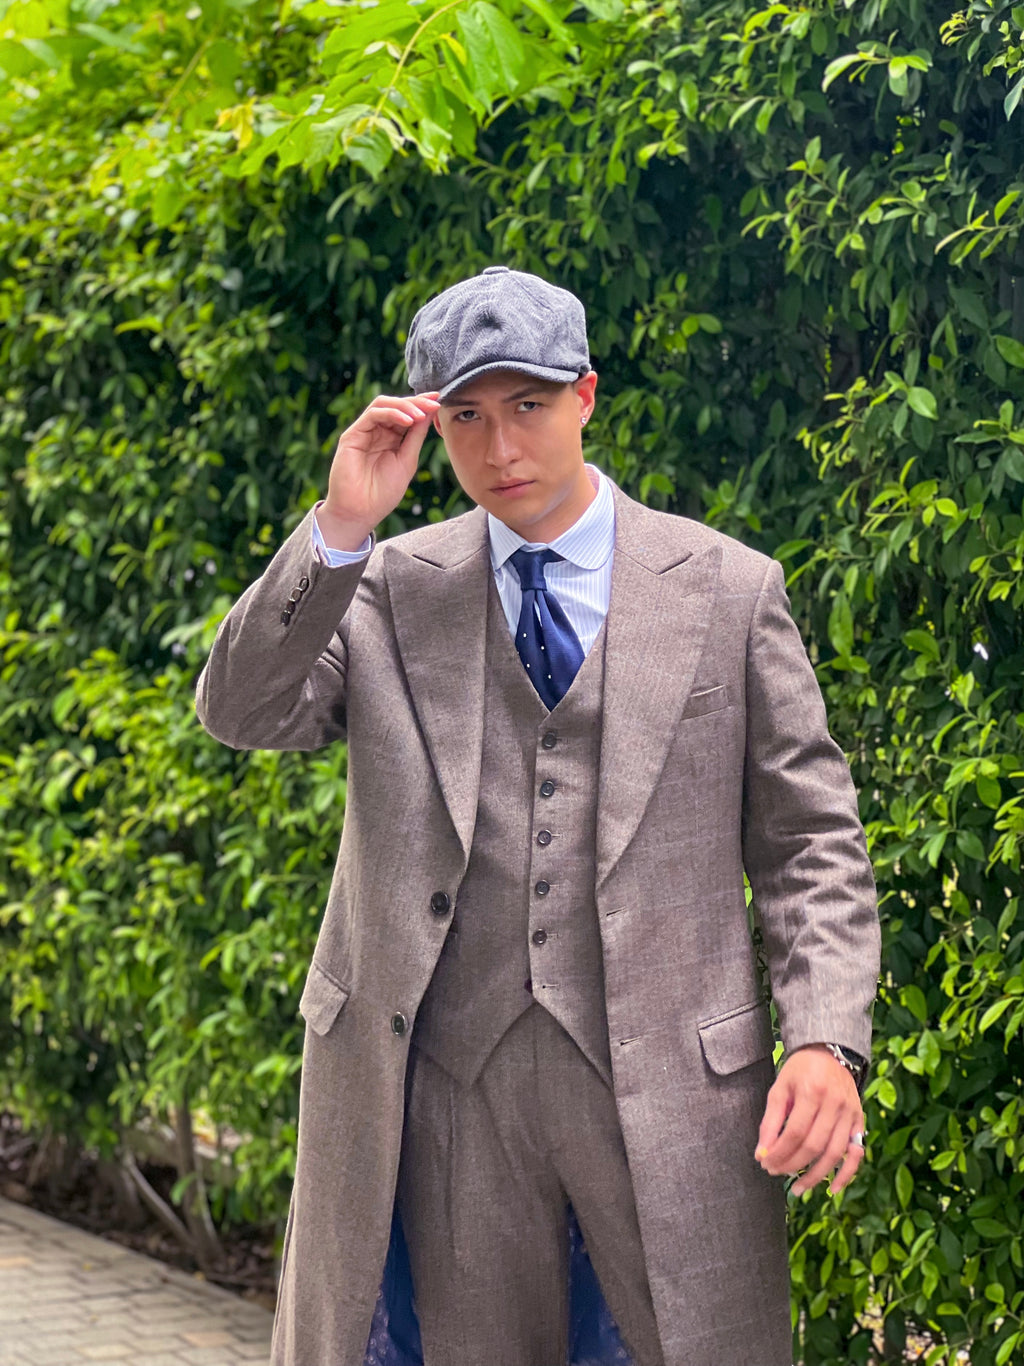 Thomas Shelby (Peaky Blinders) Outfit